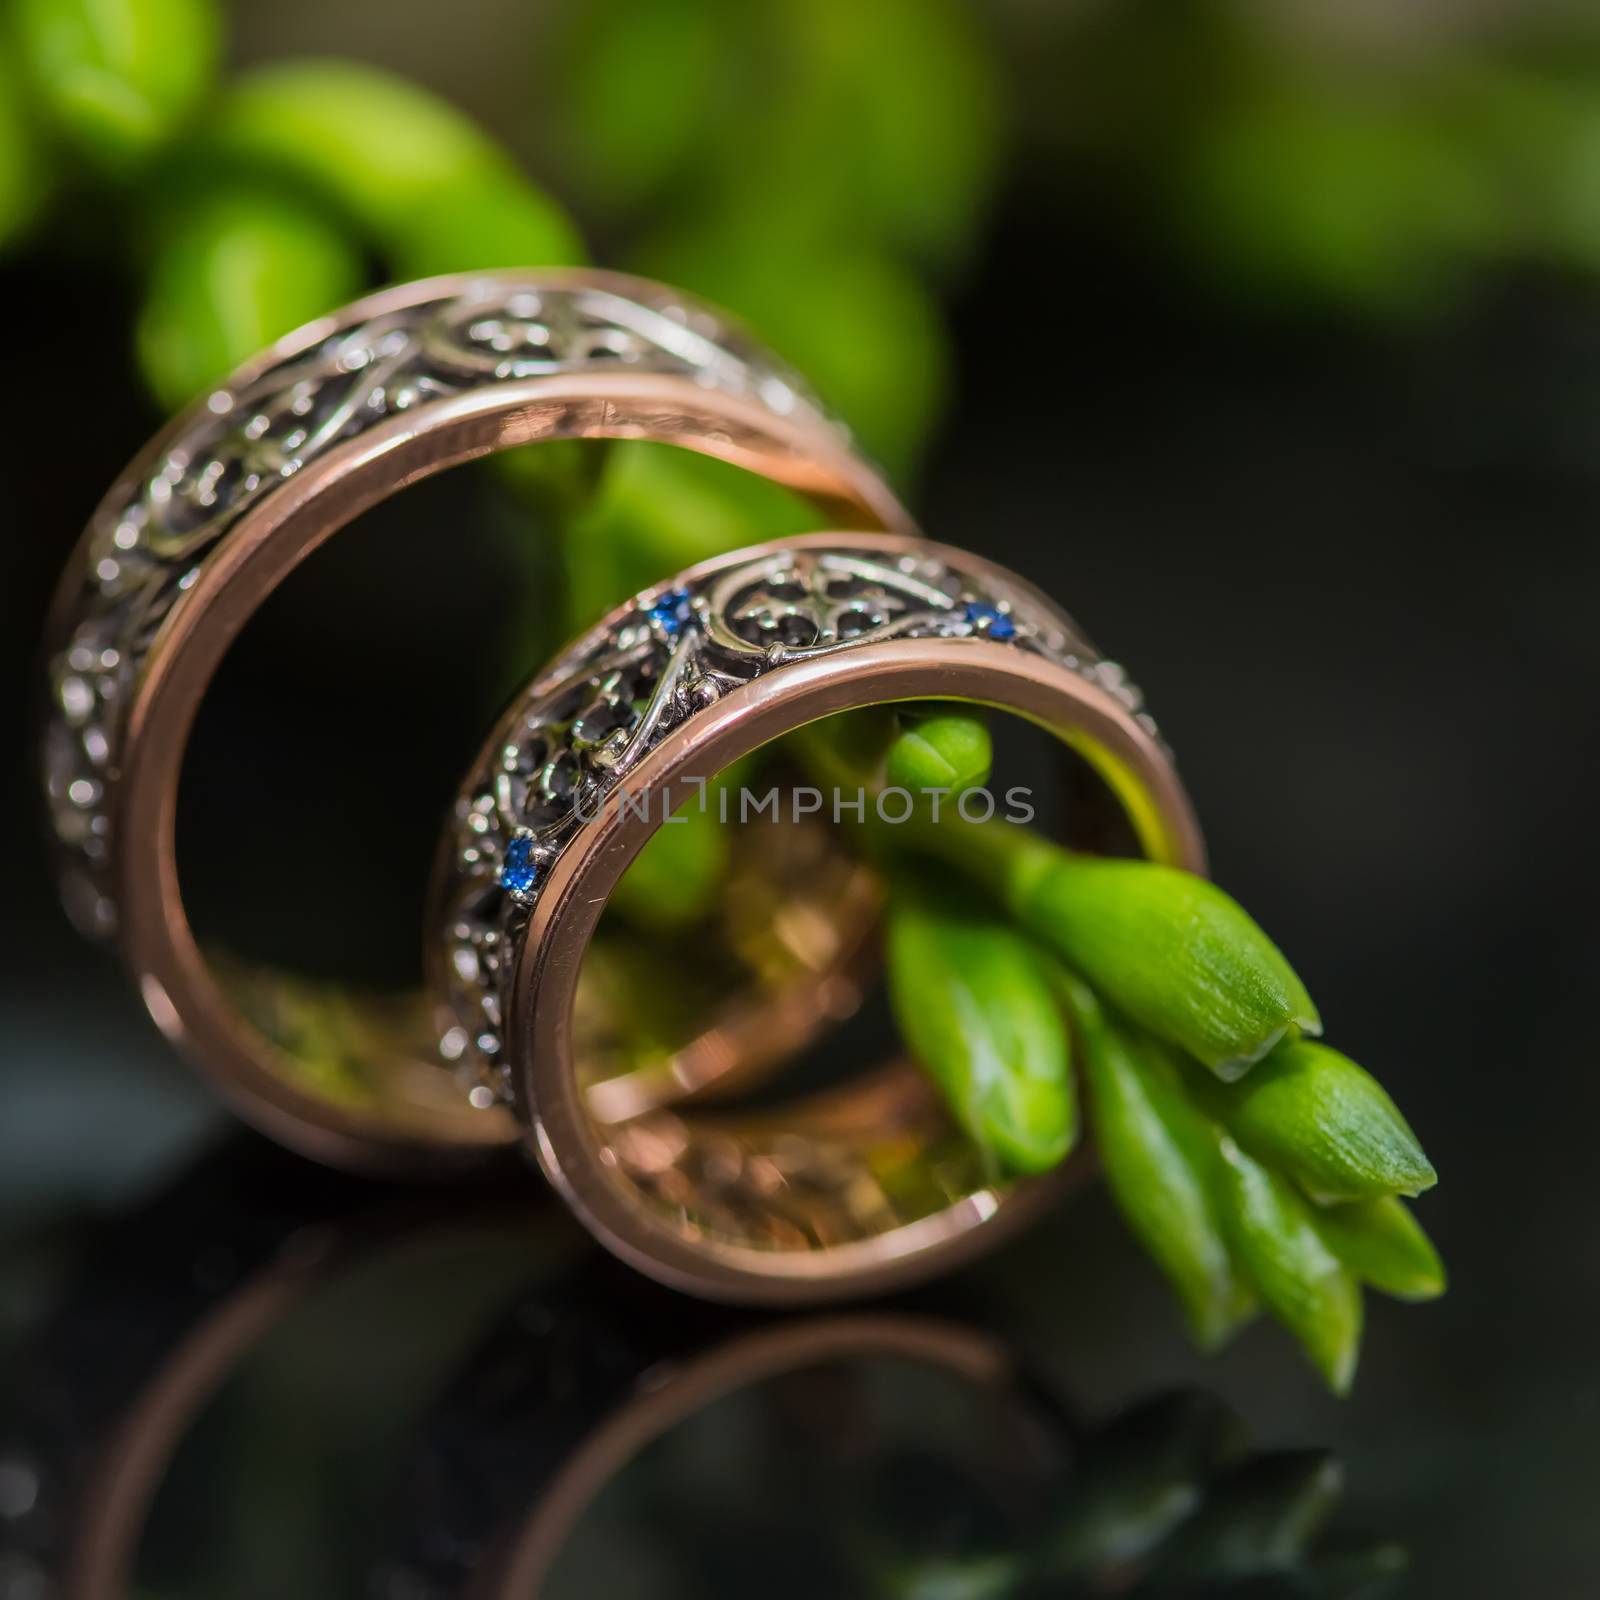 Two wedding rings in infinity sign with bouquet on black background. Love concept.